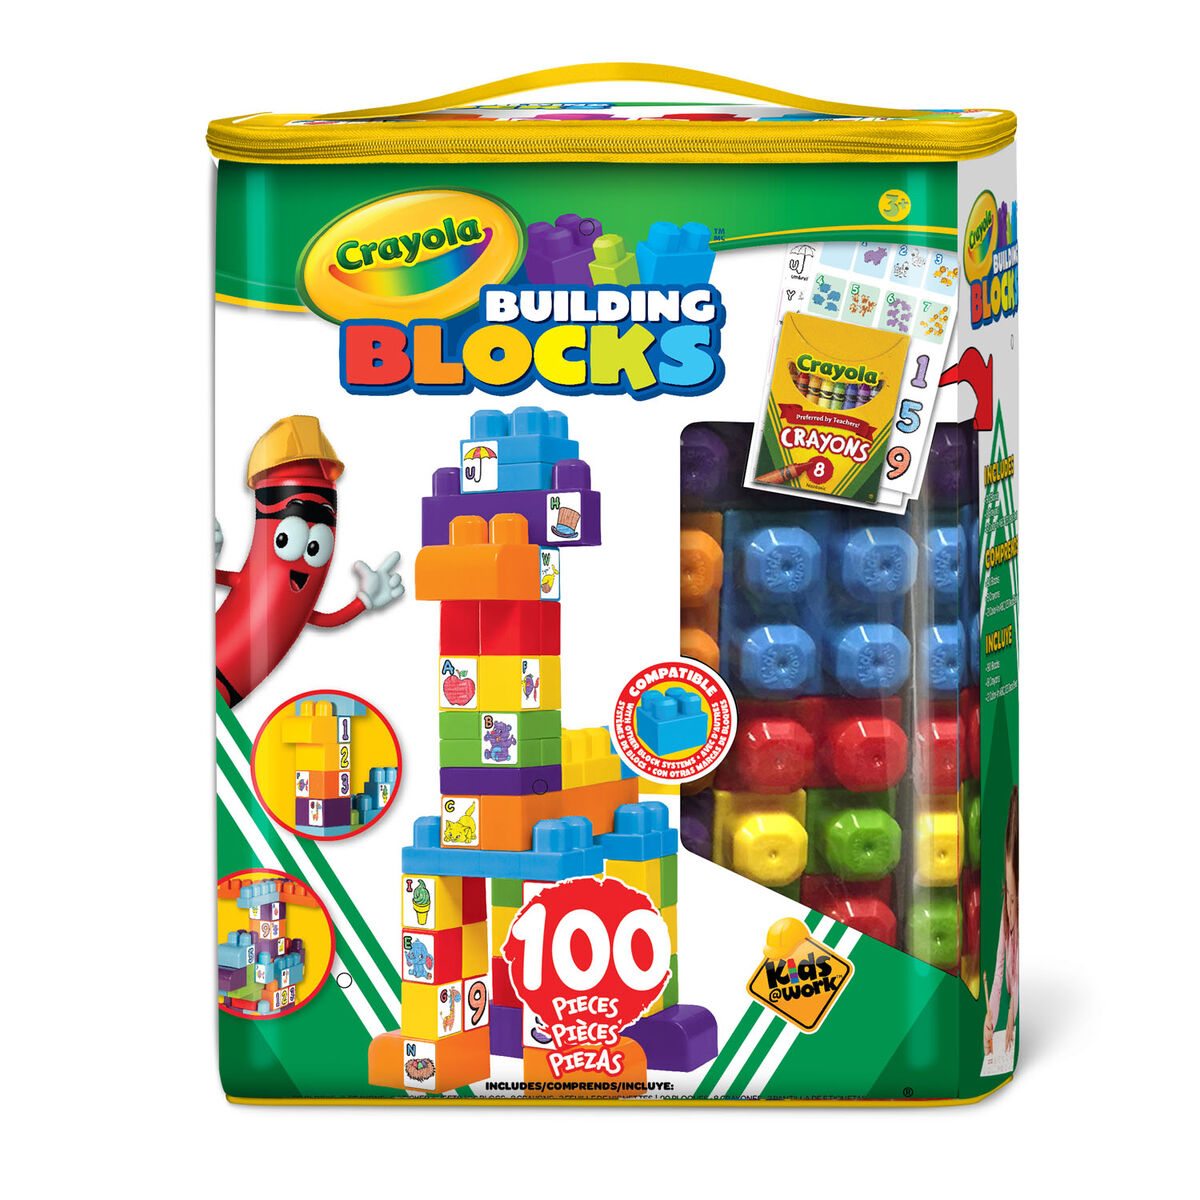 <p>This Crayola Building Blocks set comes in an easy to carry tote - great for storage once your child has finished building their own creations. Tote makes it easy to take on trips, or bring to a friends house for play. This set includes tons of blocks for building whatever the imagination dreams up. Decals and a box of 8 crayons are included in this set for coloring, ABC's and 123 learn-n-play. Complete with 90 count Amloid blocks, 2 sticker sheets, and a Crayola 8 ct crayon pack!</p>